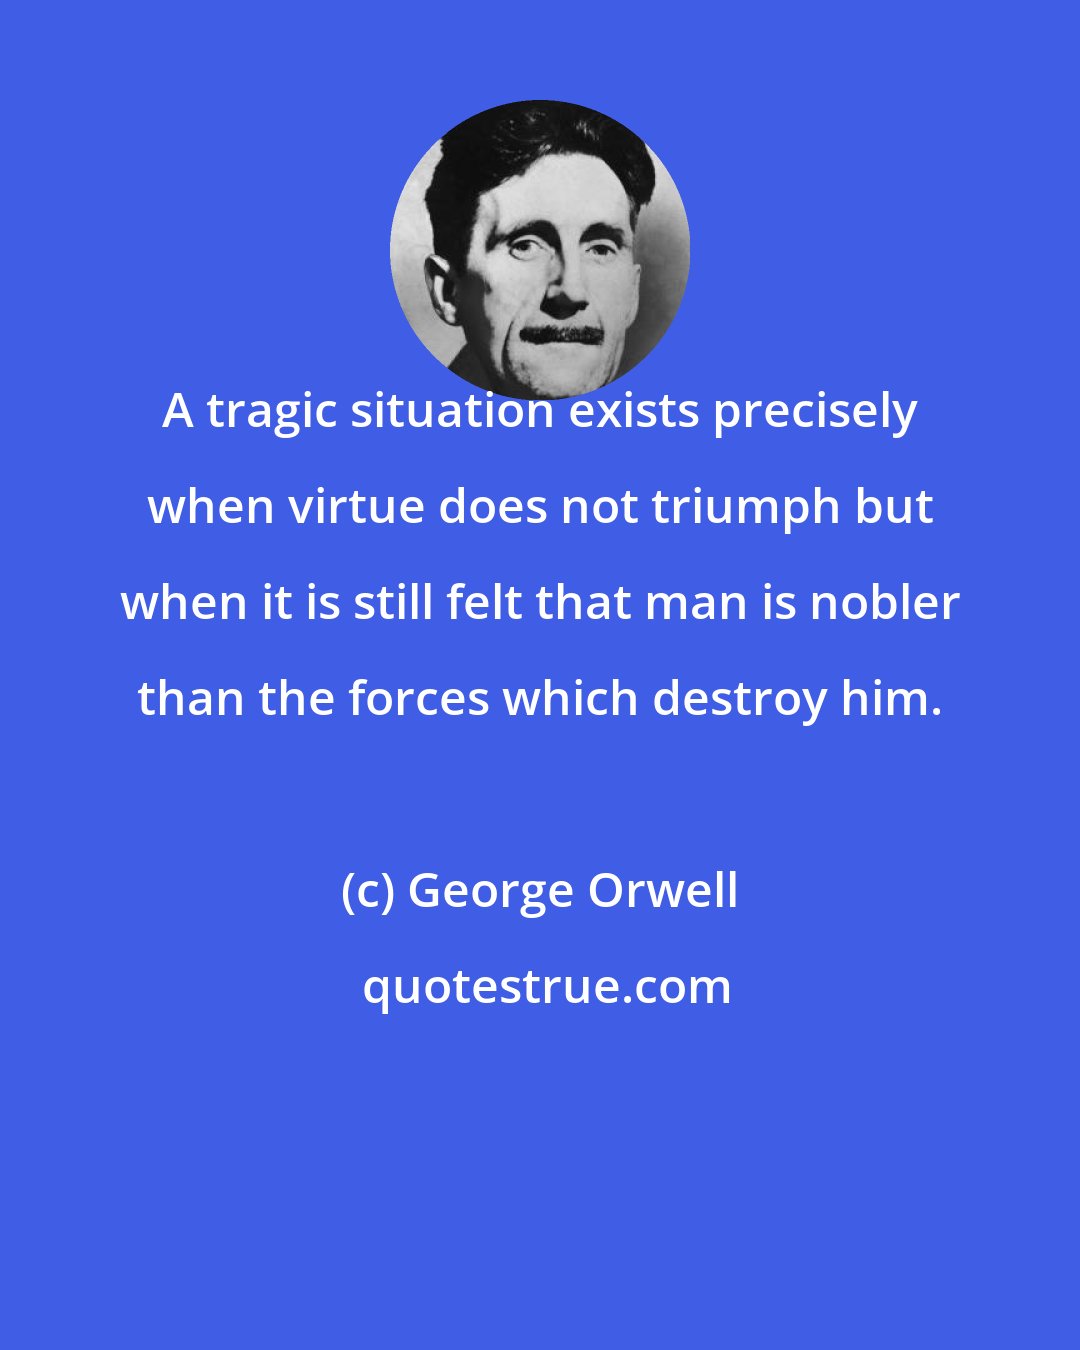 George Orwell: A tragic situation exists precisely when virtue does not triumph but when it is still felt that man is nobler than the forces which destroy him.